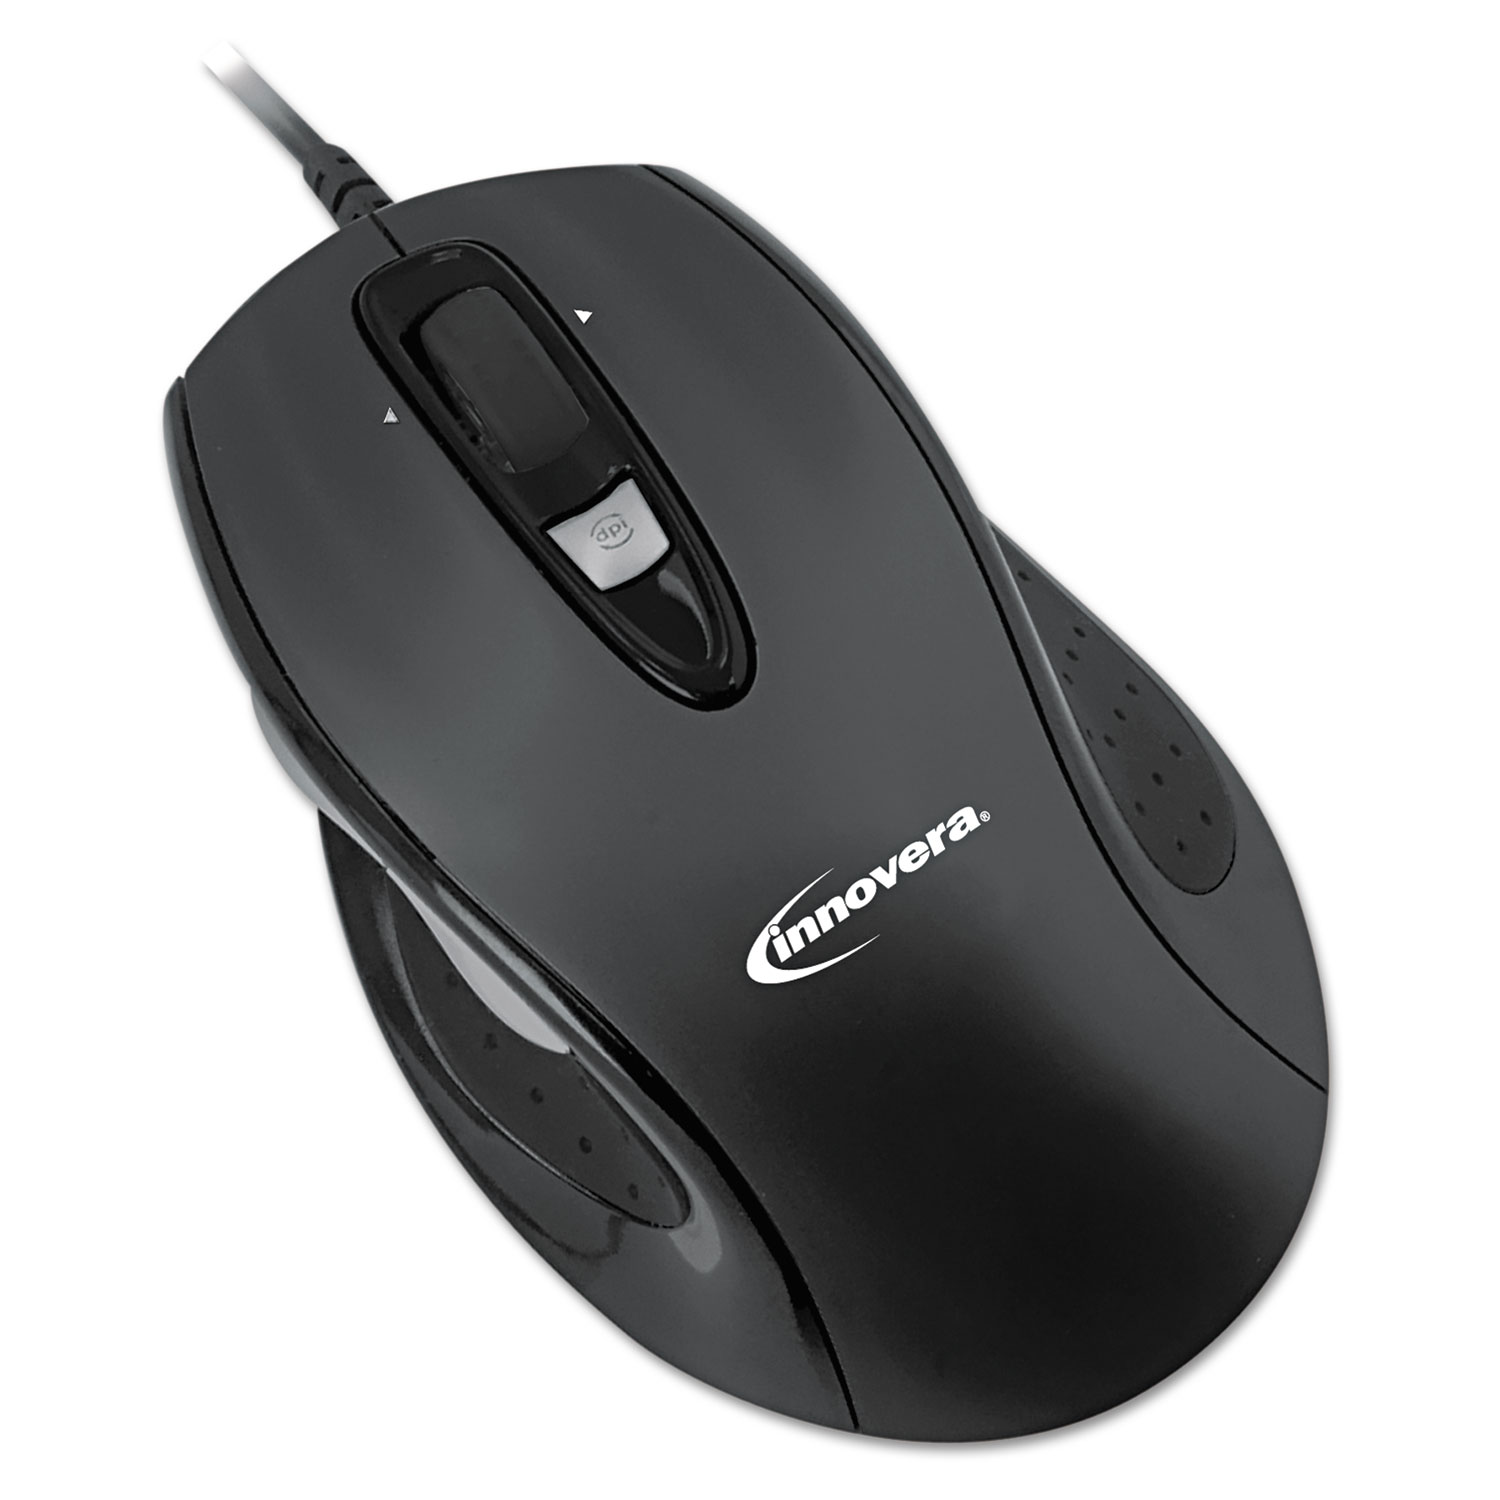  Innovera IVR61014 Full-Size Wired Optical Mouse, USB 2.0, Right Hand Use, Black (IVR61014) 